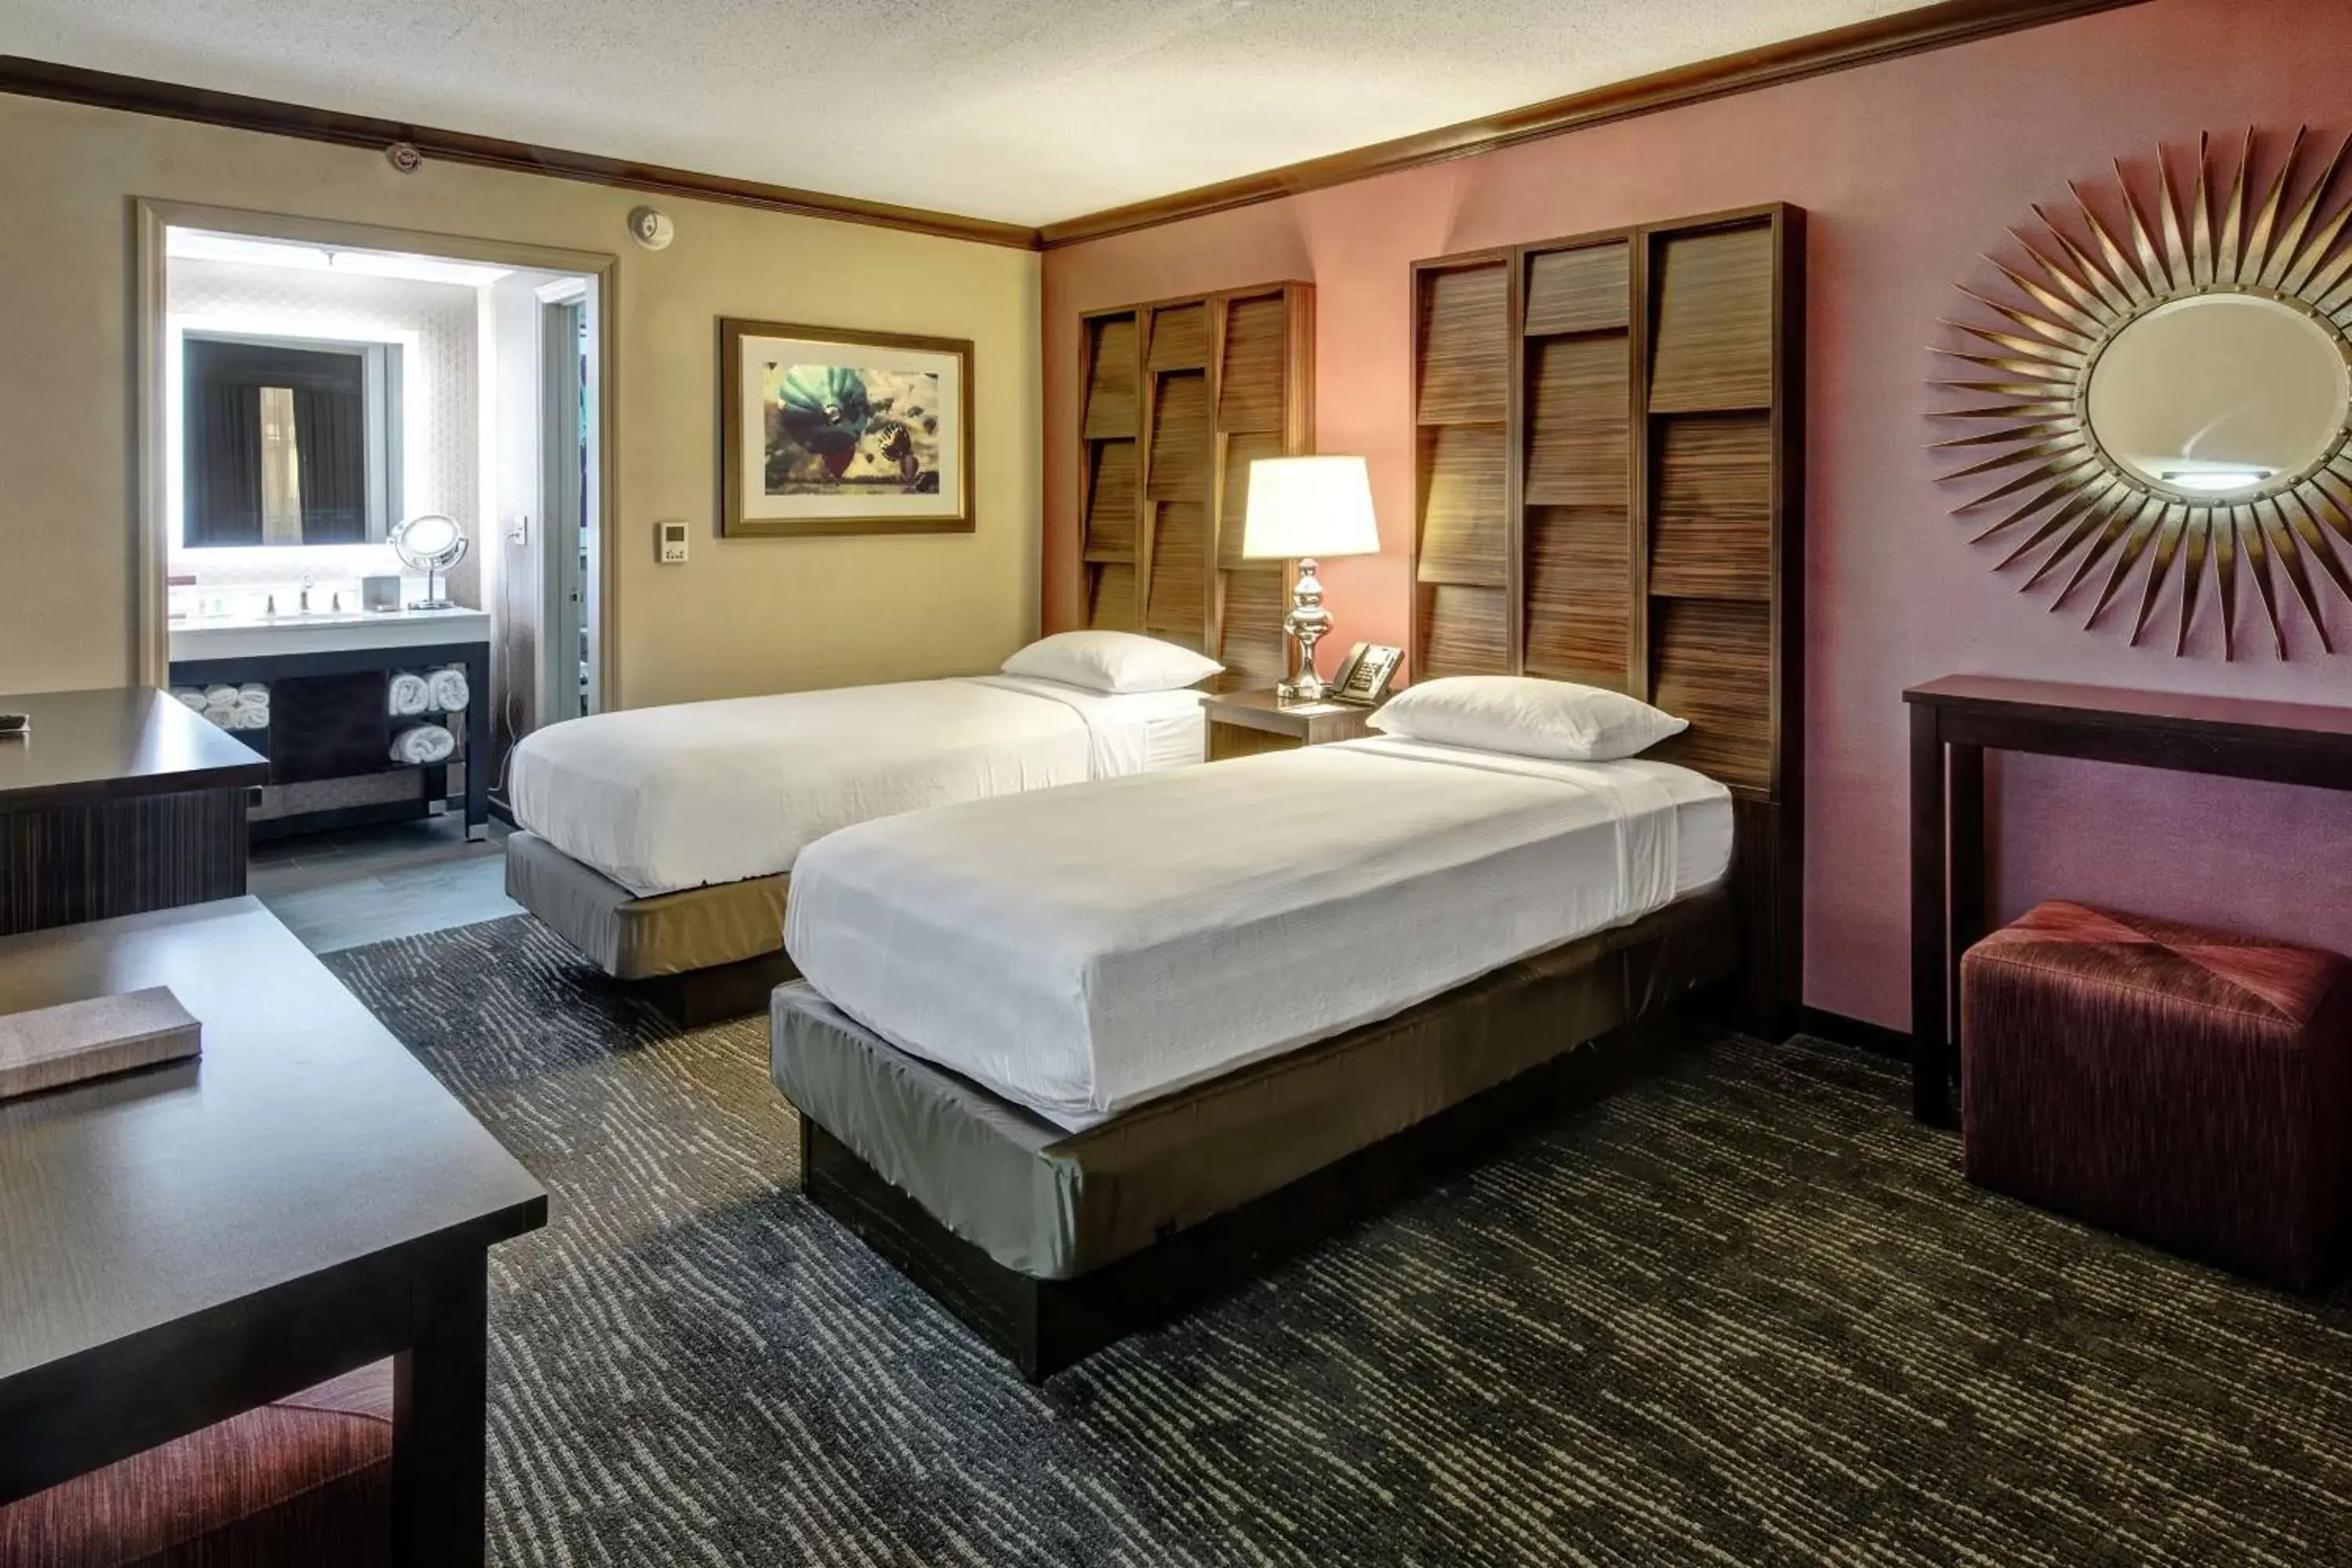 Family King Room in DoubleTree by Hilton Decatur Riverfront